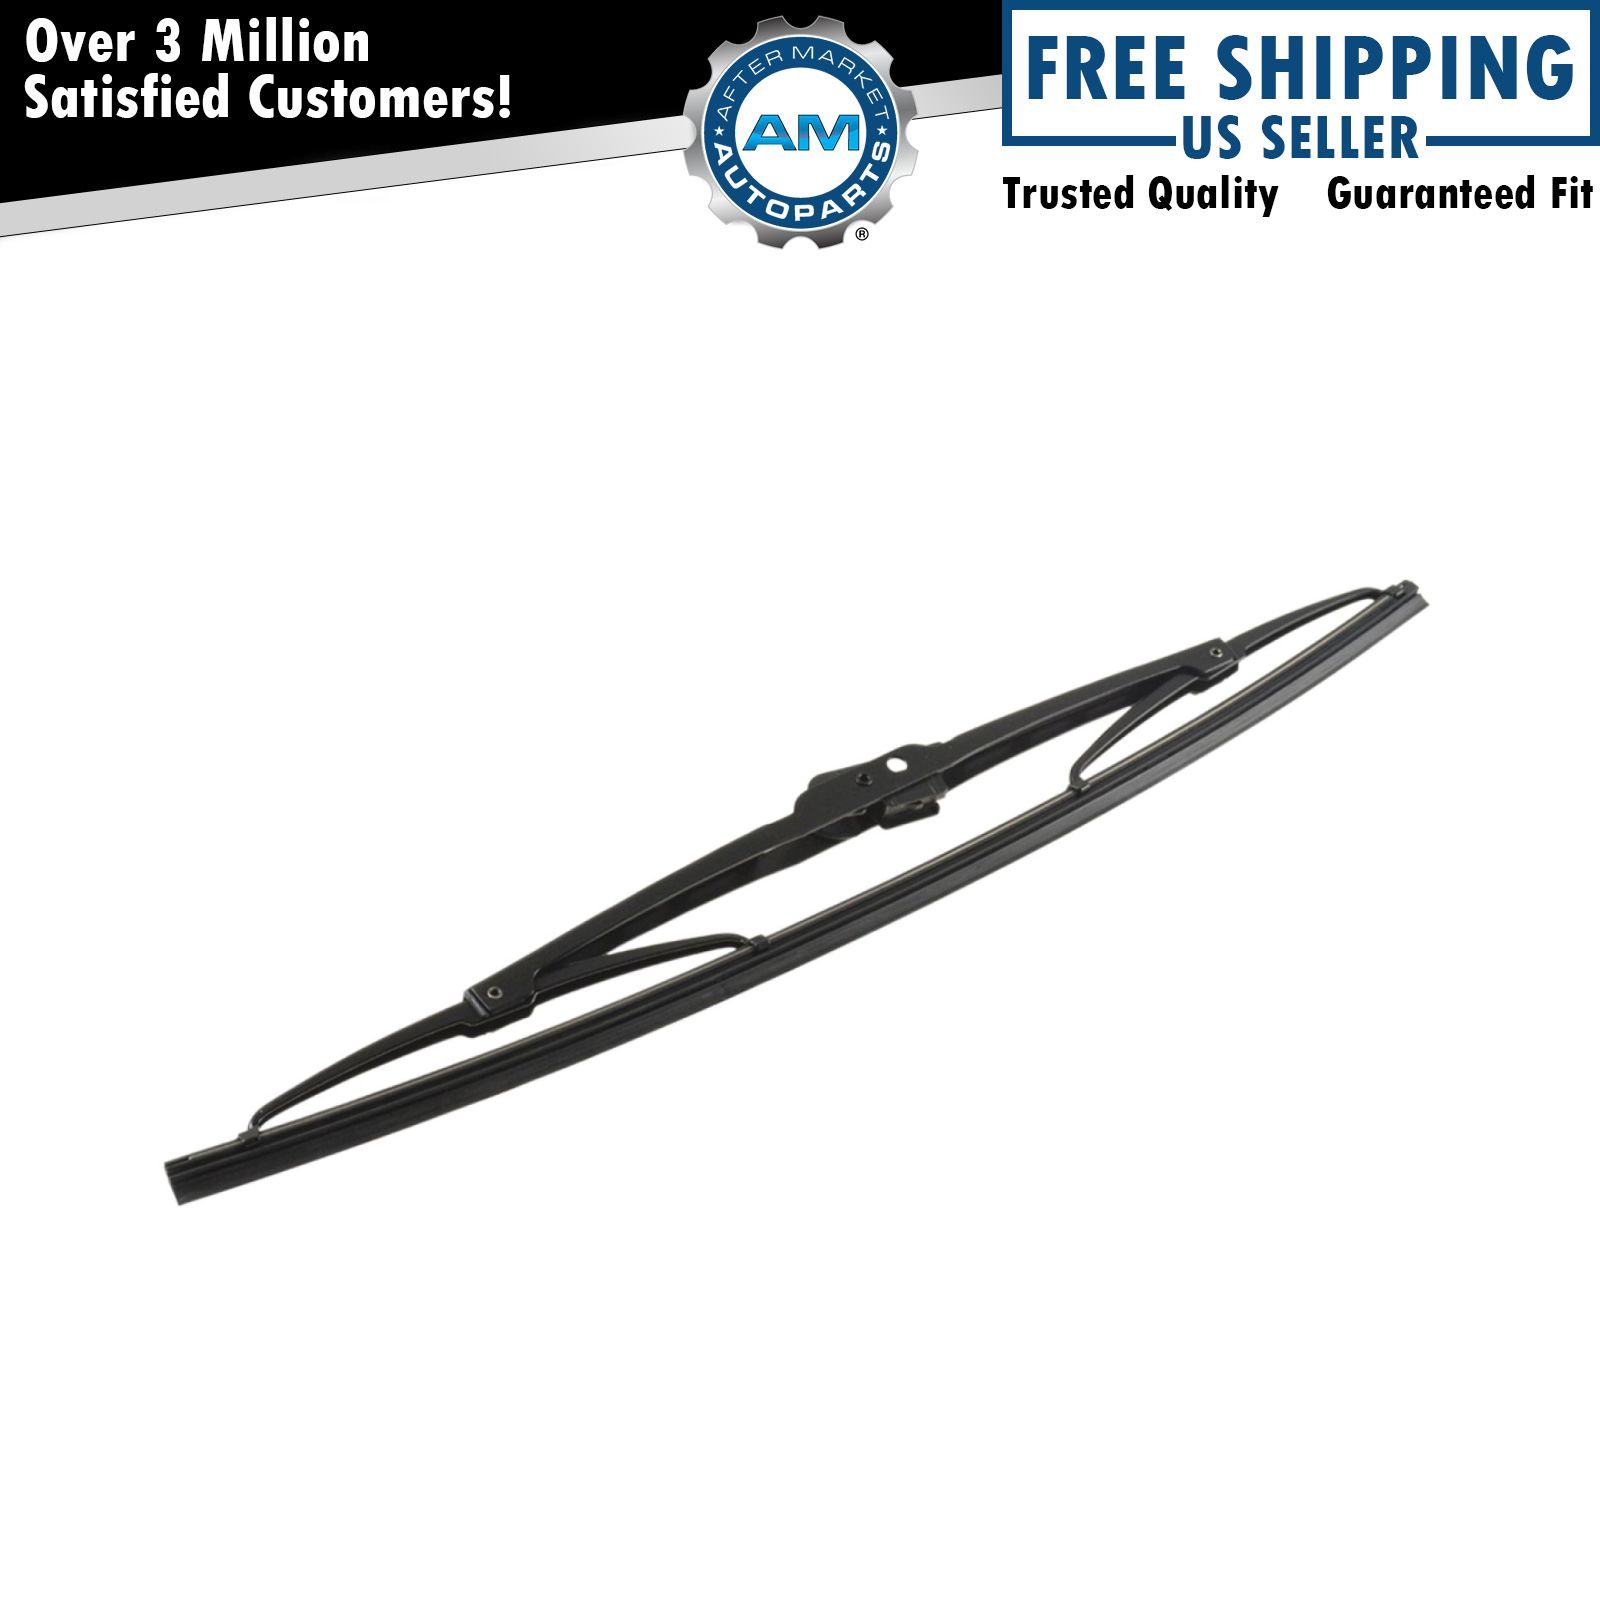 OEM Mopar 1AMWC016AA Wiper Blade 16" for Dodge Chrysler | eBay 2005 Chrysler Town And Country Wiper Blade Size